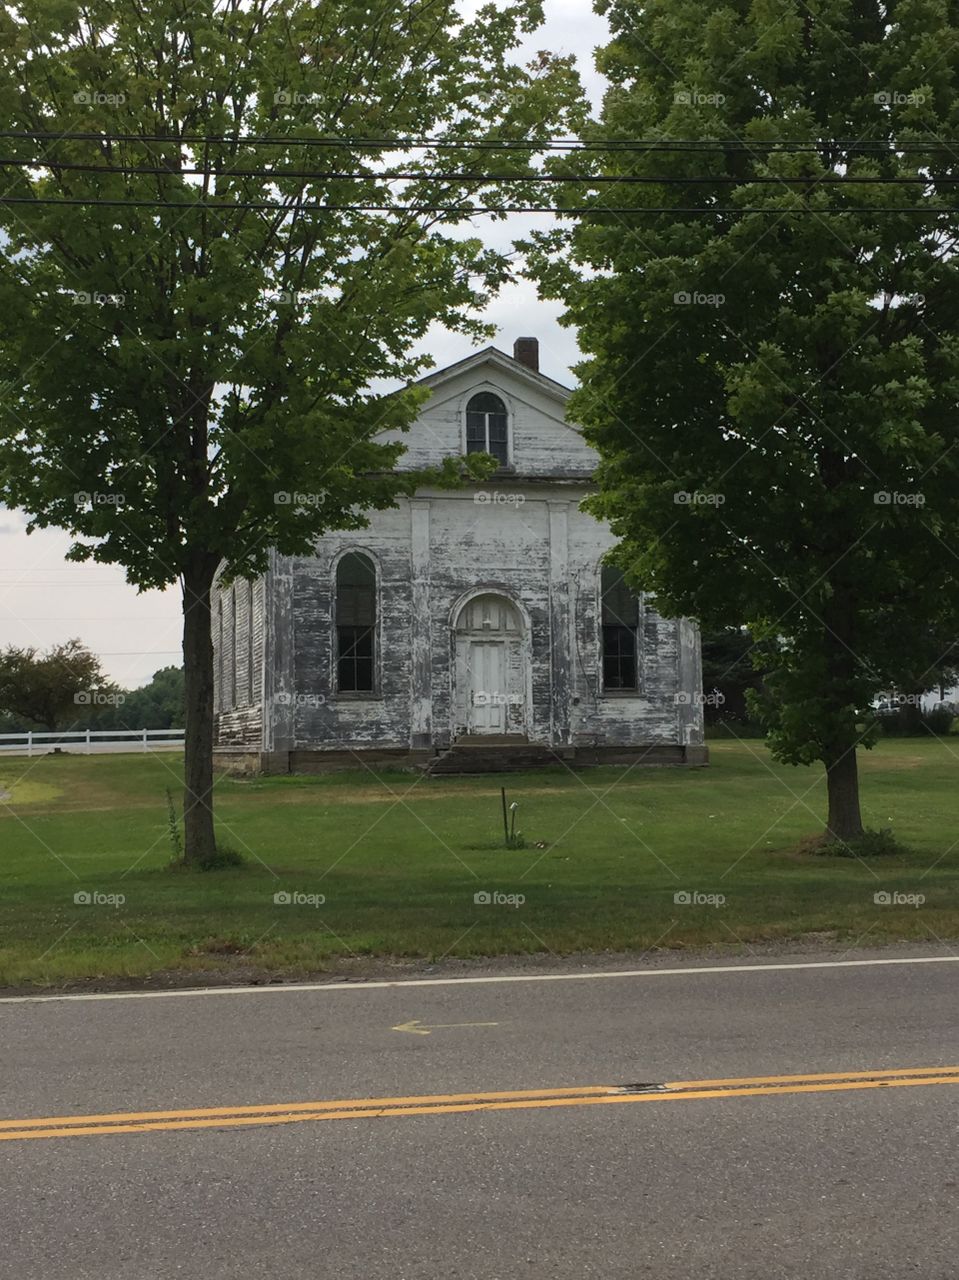 Old abandoned church /school house in the country 